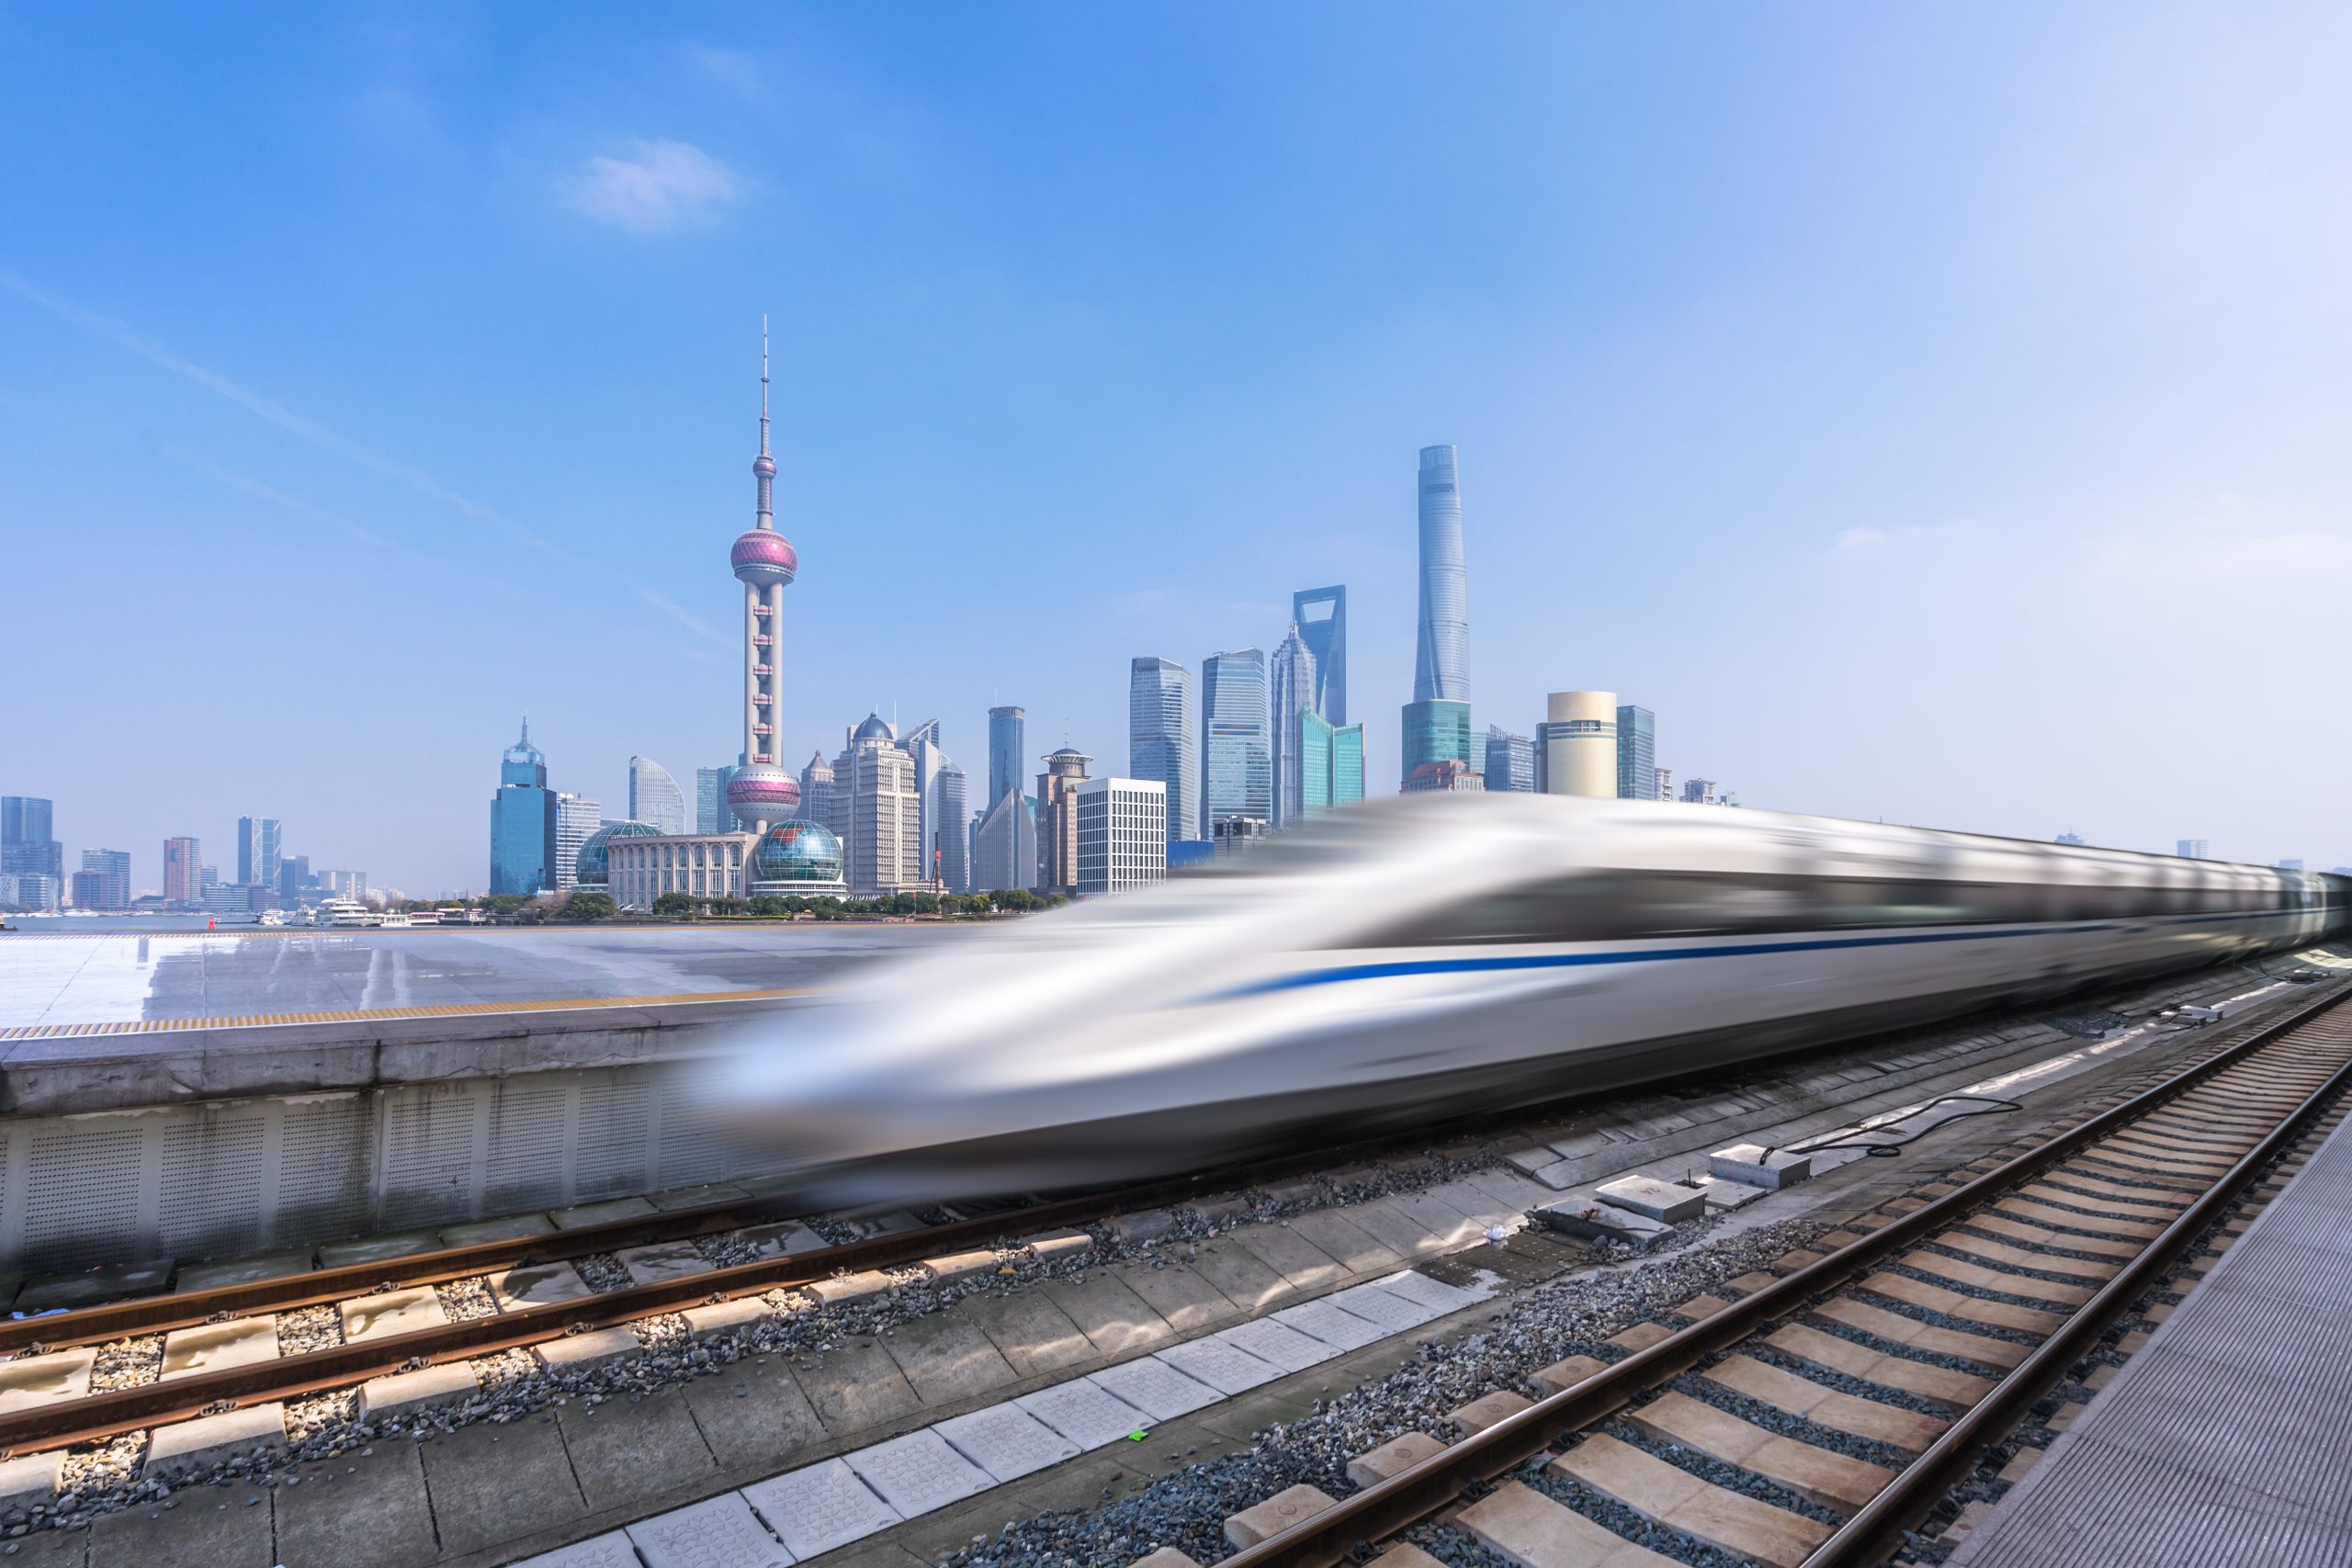 China’s railways lead the way in expansion and innovation